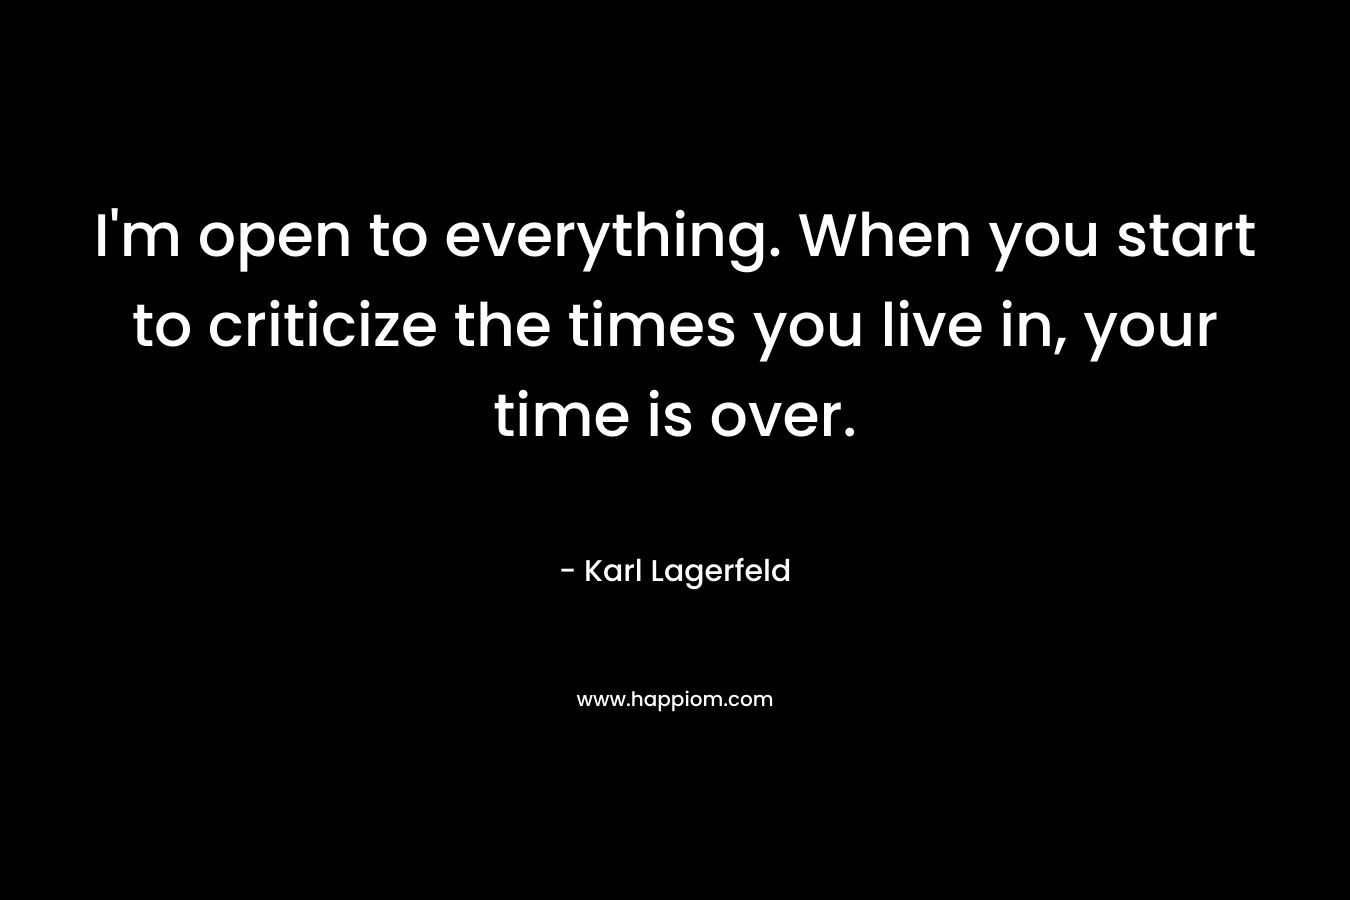 I'm open to everything. When you start to criticize the times you live in, your time is over.